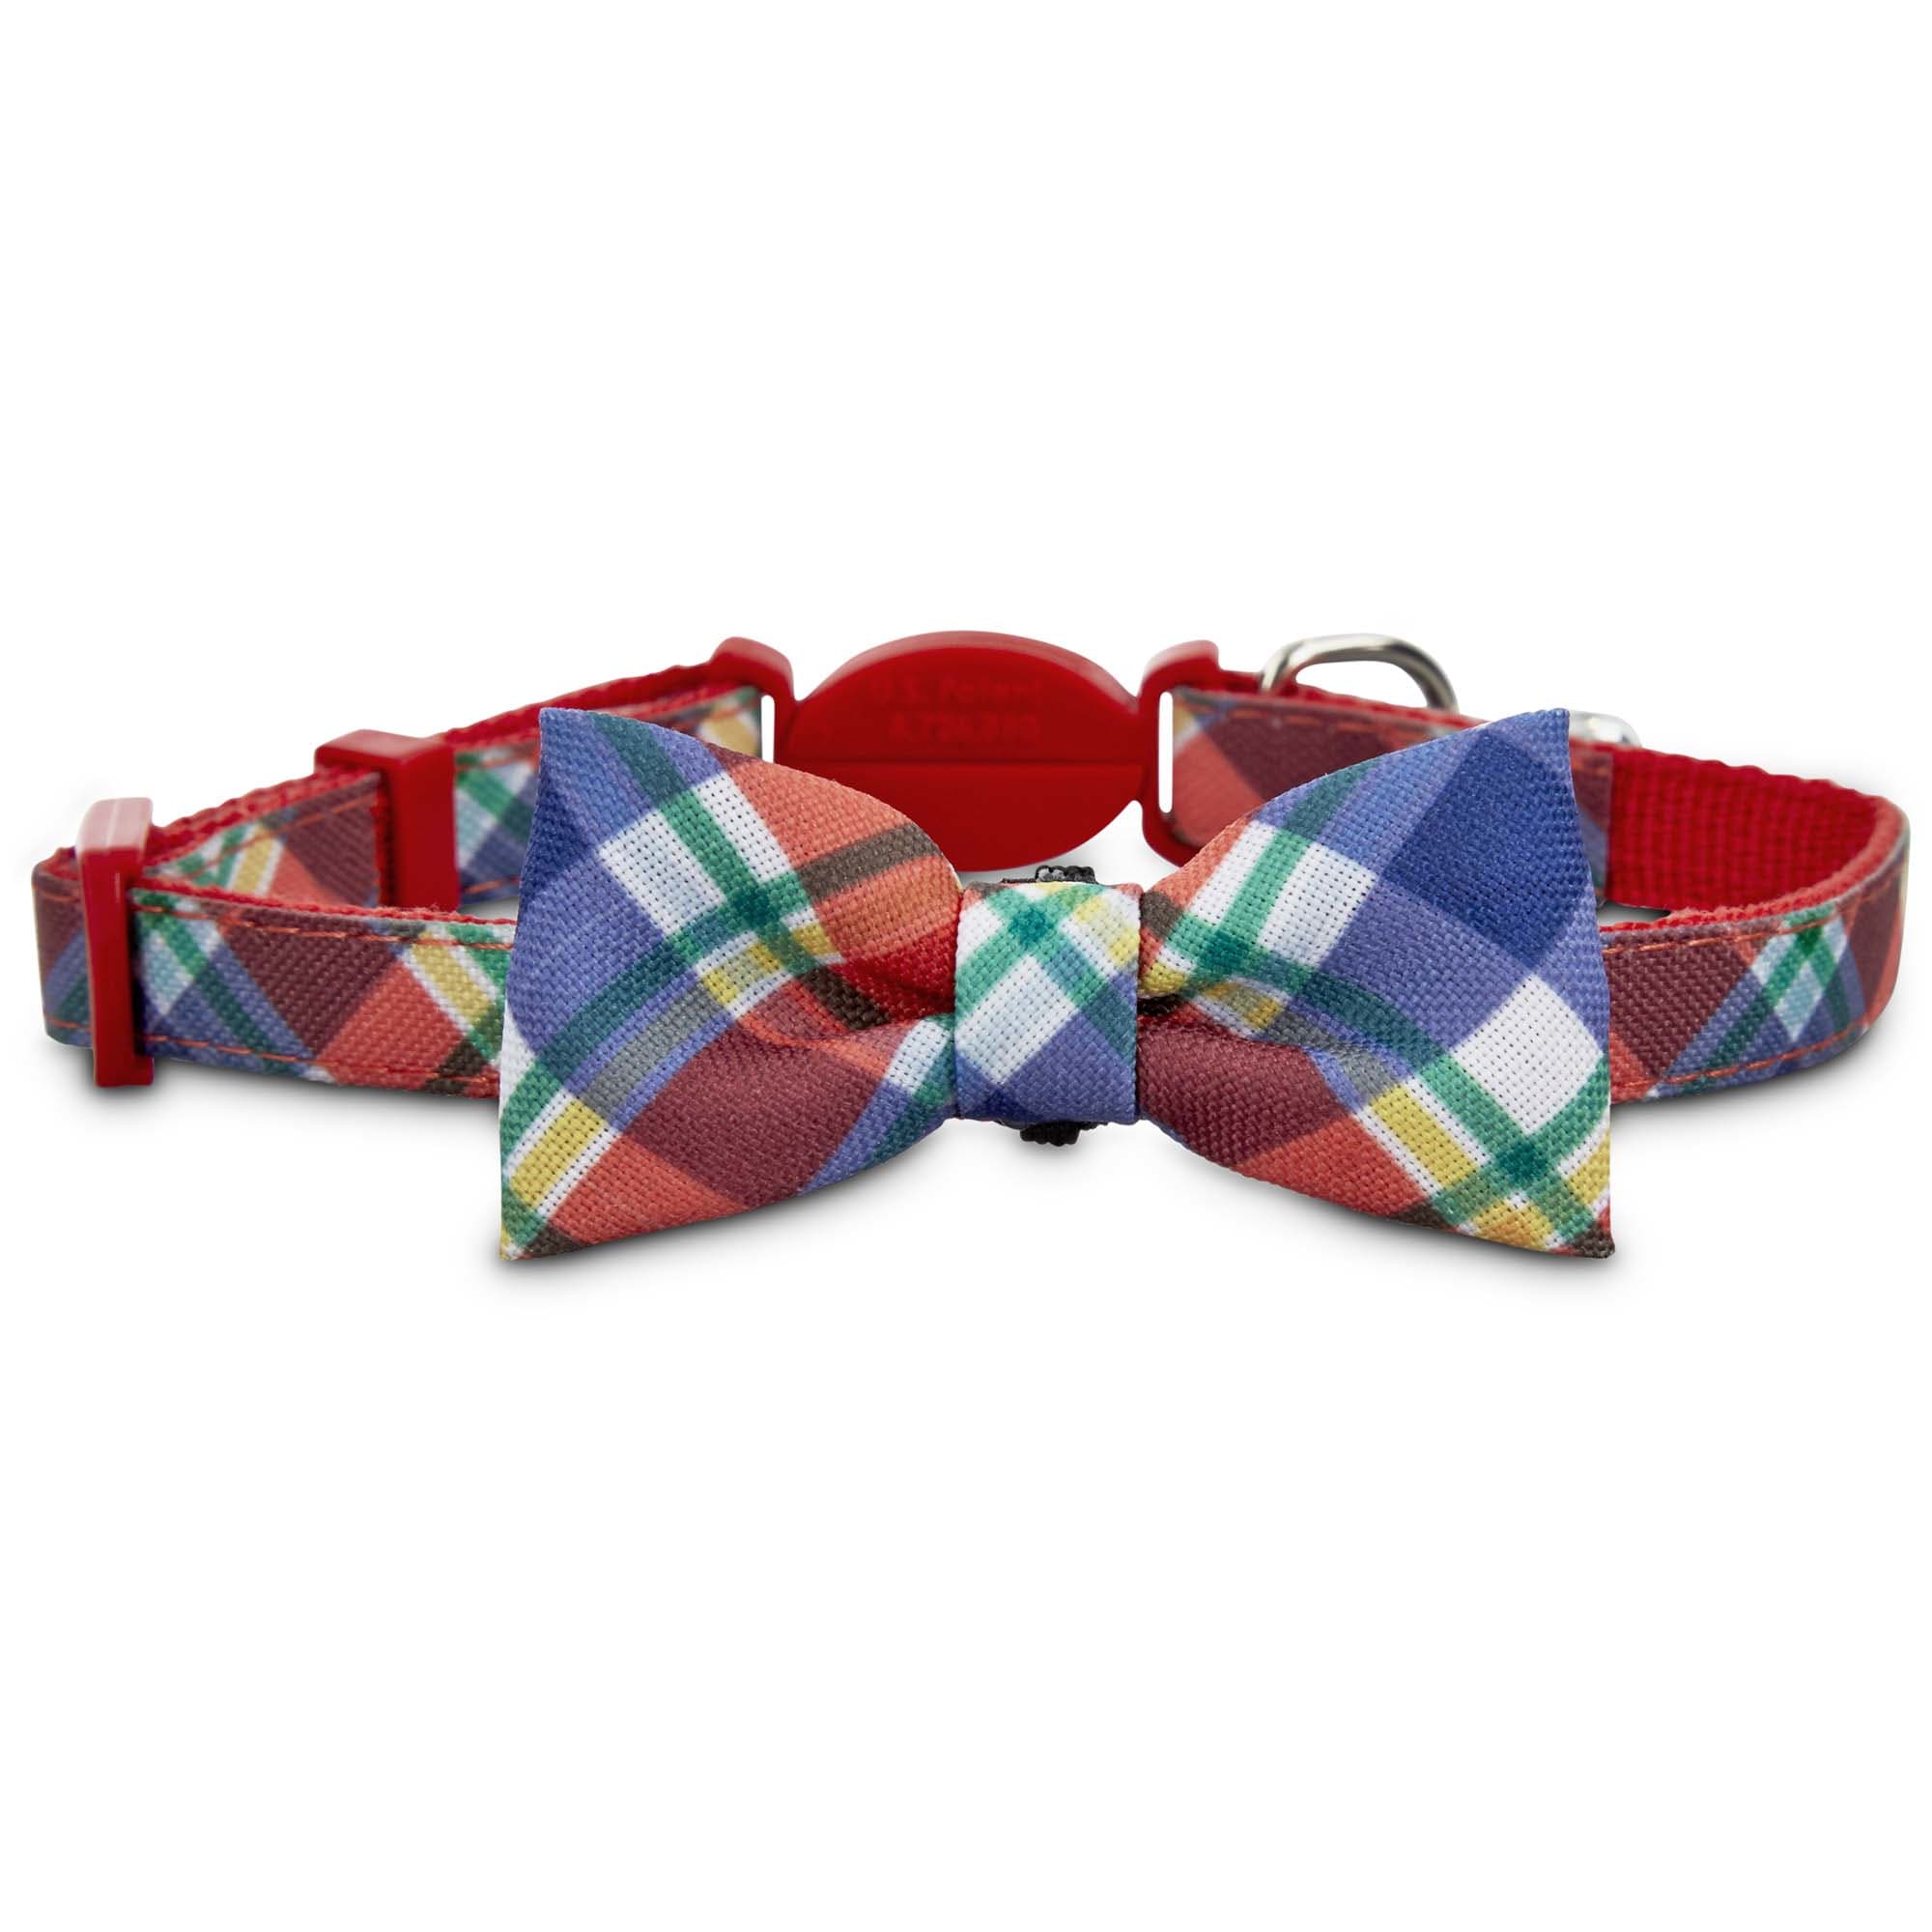 Cute Plaid Dog and Cat Collar with Bowtie for Small Medium Large Dogs Love Dream Bow Tie Dog Collar and Bandana Medium, Light Brown Soft and Comfortable